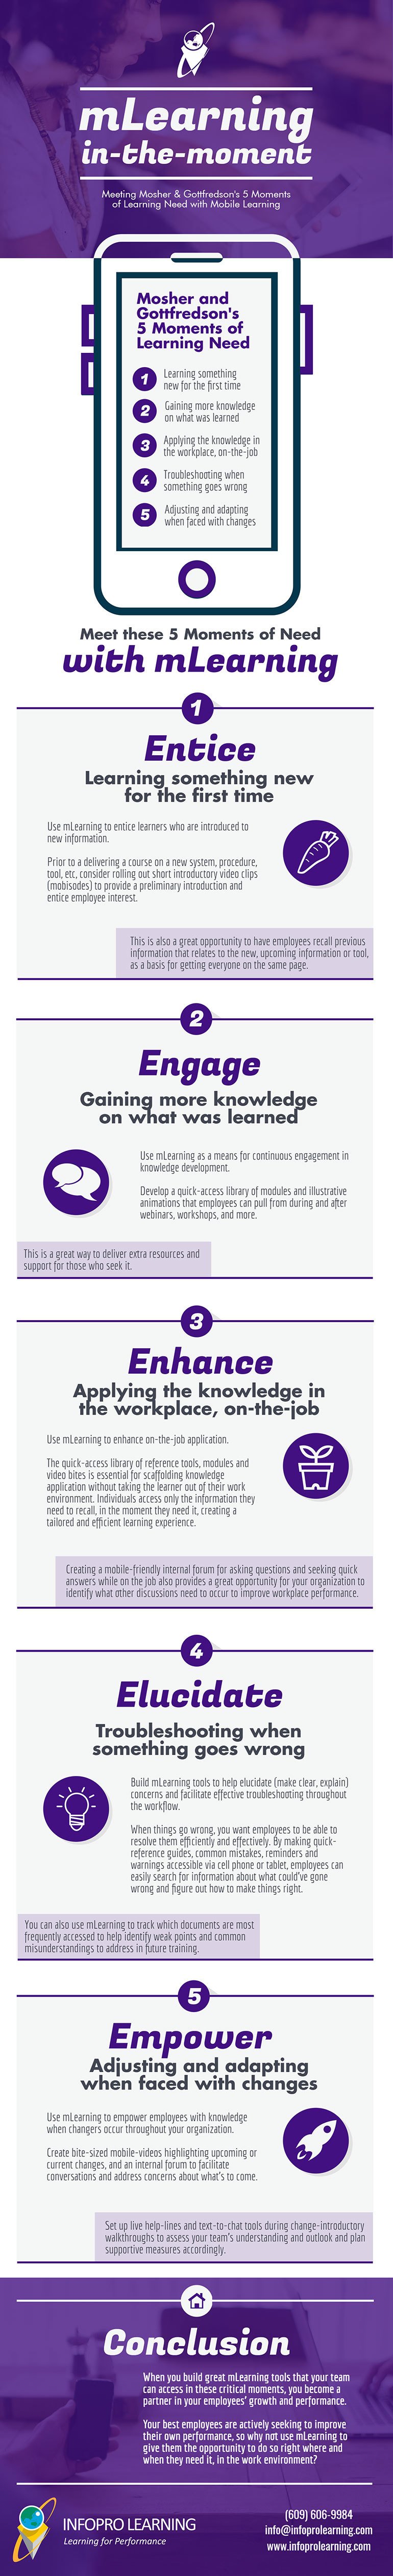 mLearning in-the-Moment: Learning Right When It’s Needed Infographic